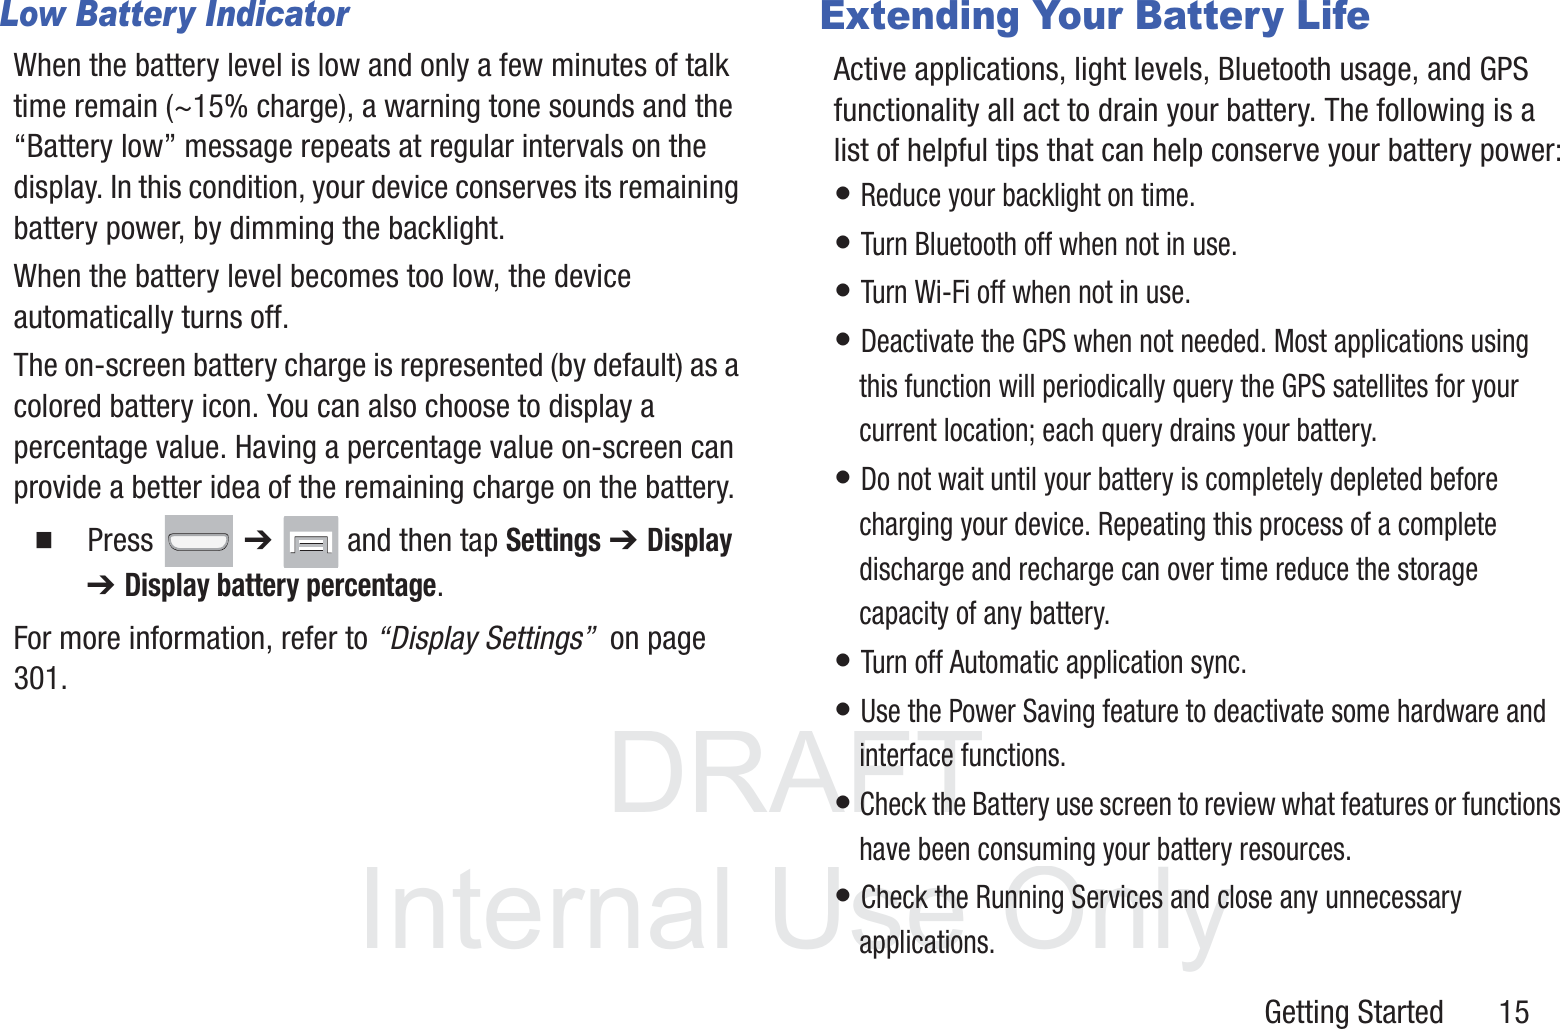 DRAFT InternalUse OnlyGetting Started       15Low Battery IndicatorWhen the battery level is low and only a few minutes of talk time remain (~15% charge), a warning tone sounds and the “Battery low” message repeats at regular intervals on the display. In this condition, your device conserves its remaining battery power, by dimming the backlight.When the battery level becomes too low, the device automatically turns off.The on-screen battery charge is represented (by default) as a colored battery icon. You can also choose to display a percentage value. Having a percentage value on-screen can provide a better idea of the remaining charge on the battery.䡲  Press  ➔   and then tap Settings ➔ Display ➔ Display battery percentage. For more information, refer to “Display Settings”  on page 301.Extending Your Battery LifeActive applications, light levels, Bluetooth usage, and GPS functionality all act to drain your battery. The following is a list of helpful tips that can help conserve your battery power:• Reduce your backlight on time. • Turn Bluetooth off when not in use.• Turn Wi-Fi off when not in use. • Deactivate the GPS when not needed. Most applications using this function will periodically query the GPS satellites for your current location; each query drains your battery. • Do not wait until your battery is completely depleted before charging your device. Repeating this process of a complete discharge and recharge can over time reduce the storage capacity of any battery. • Turn off Automatic application sync. • Use the Power Saving feature to deactivate some hardware and interface functions. • Check the Battery use screen to review what features or functions have been consuming your battery resources.• Check the Running Services and close any unnecessary applications.